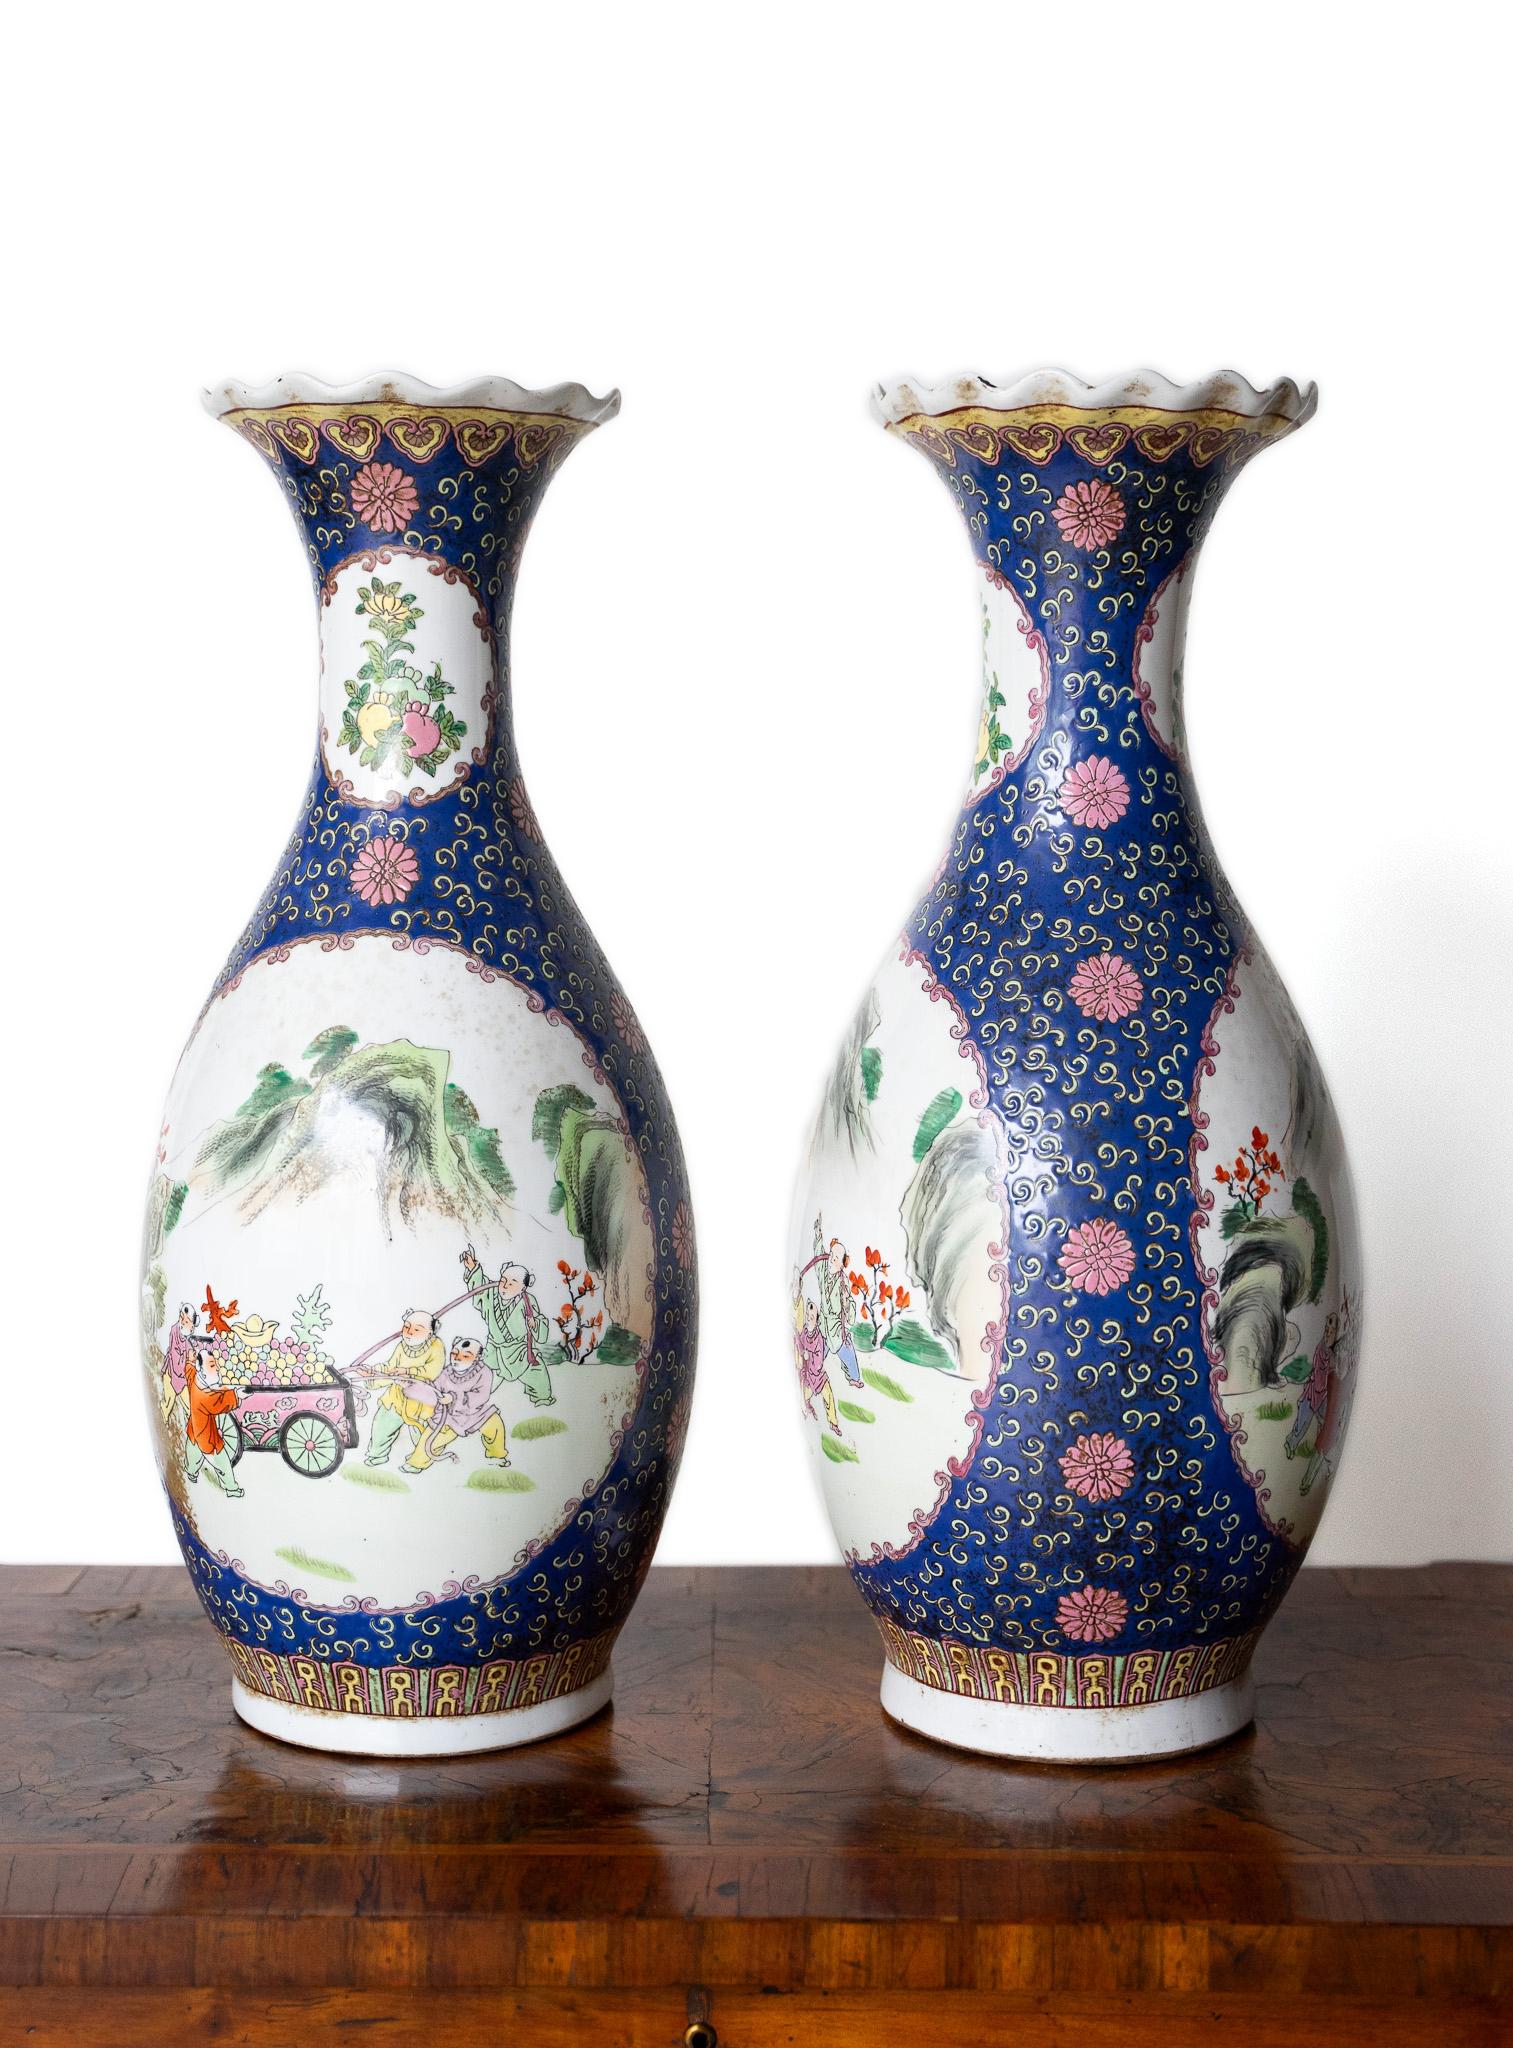 Pair of antique Chinese blue and white porcelain vases
Era: late 1800s-early 1900s
Origin: China
Material: Ceramic
Dimensions: Diameter 18 cm, height 63 cm
Condition: Very good condition
Description: Wonderful pair of antique blue and white Chinese